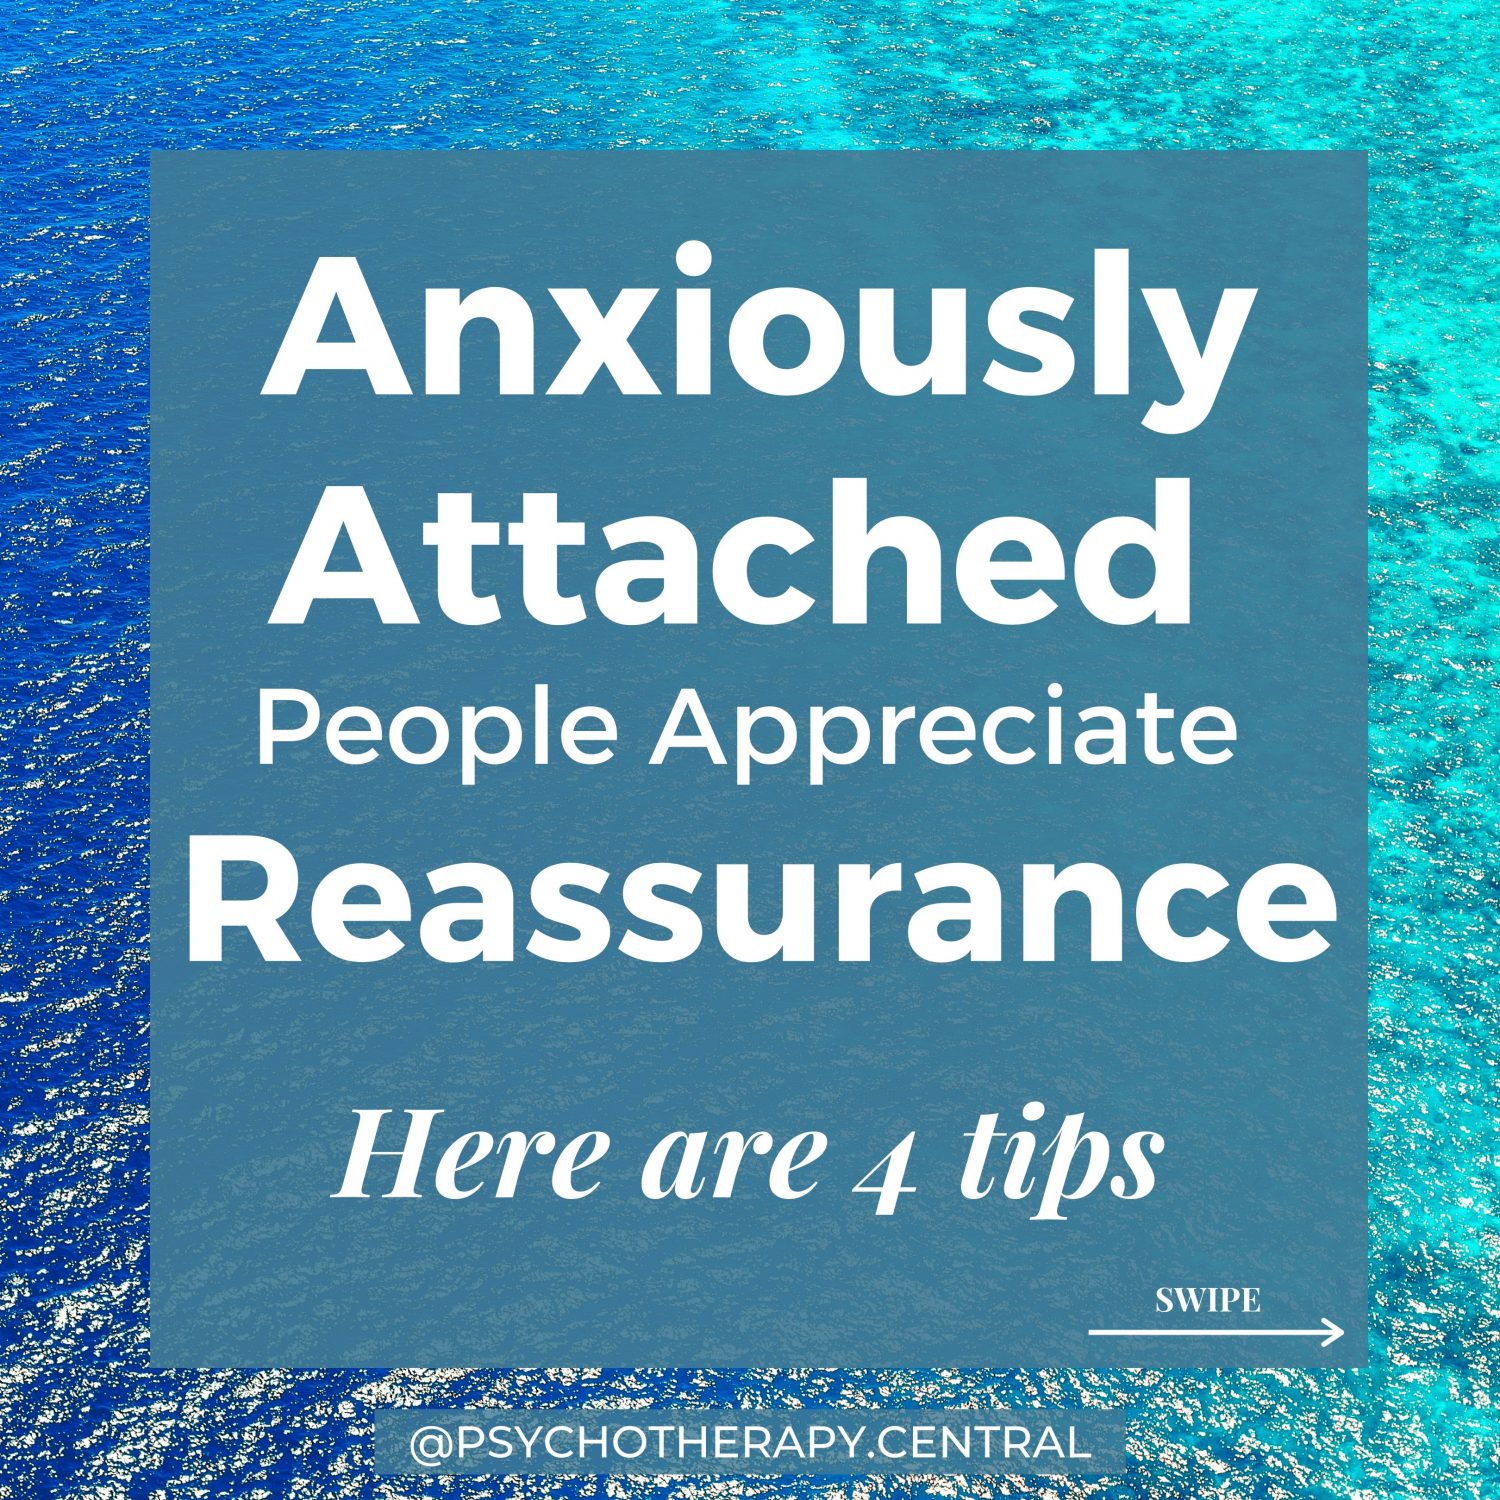 Anxiously Attached People Appreciate Reassurance